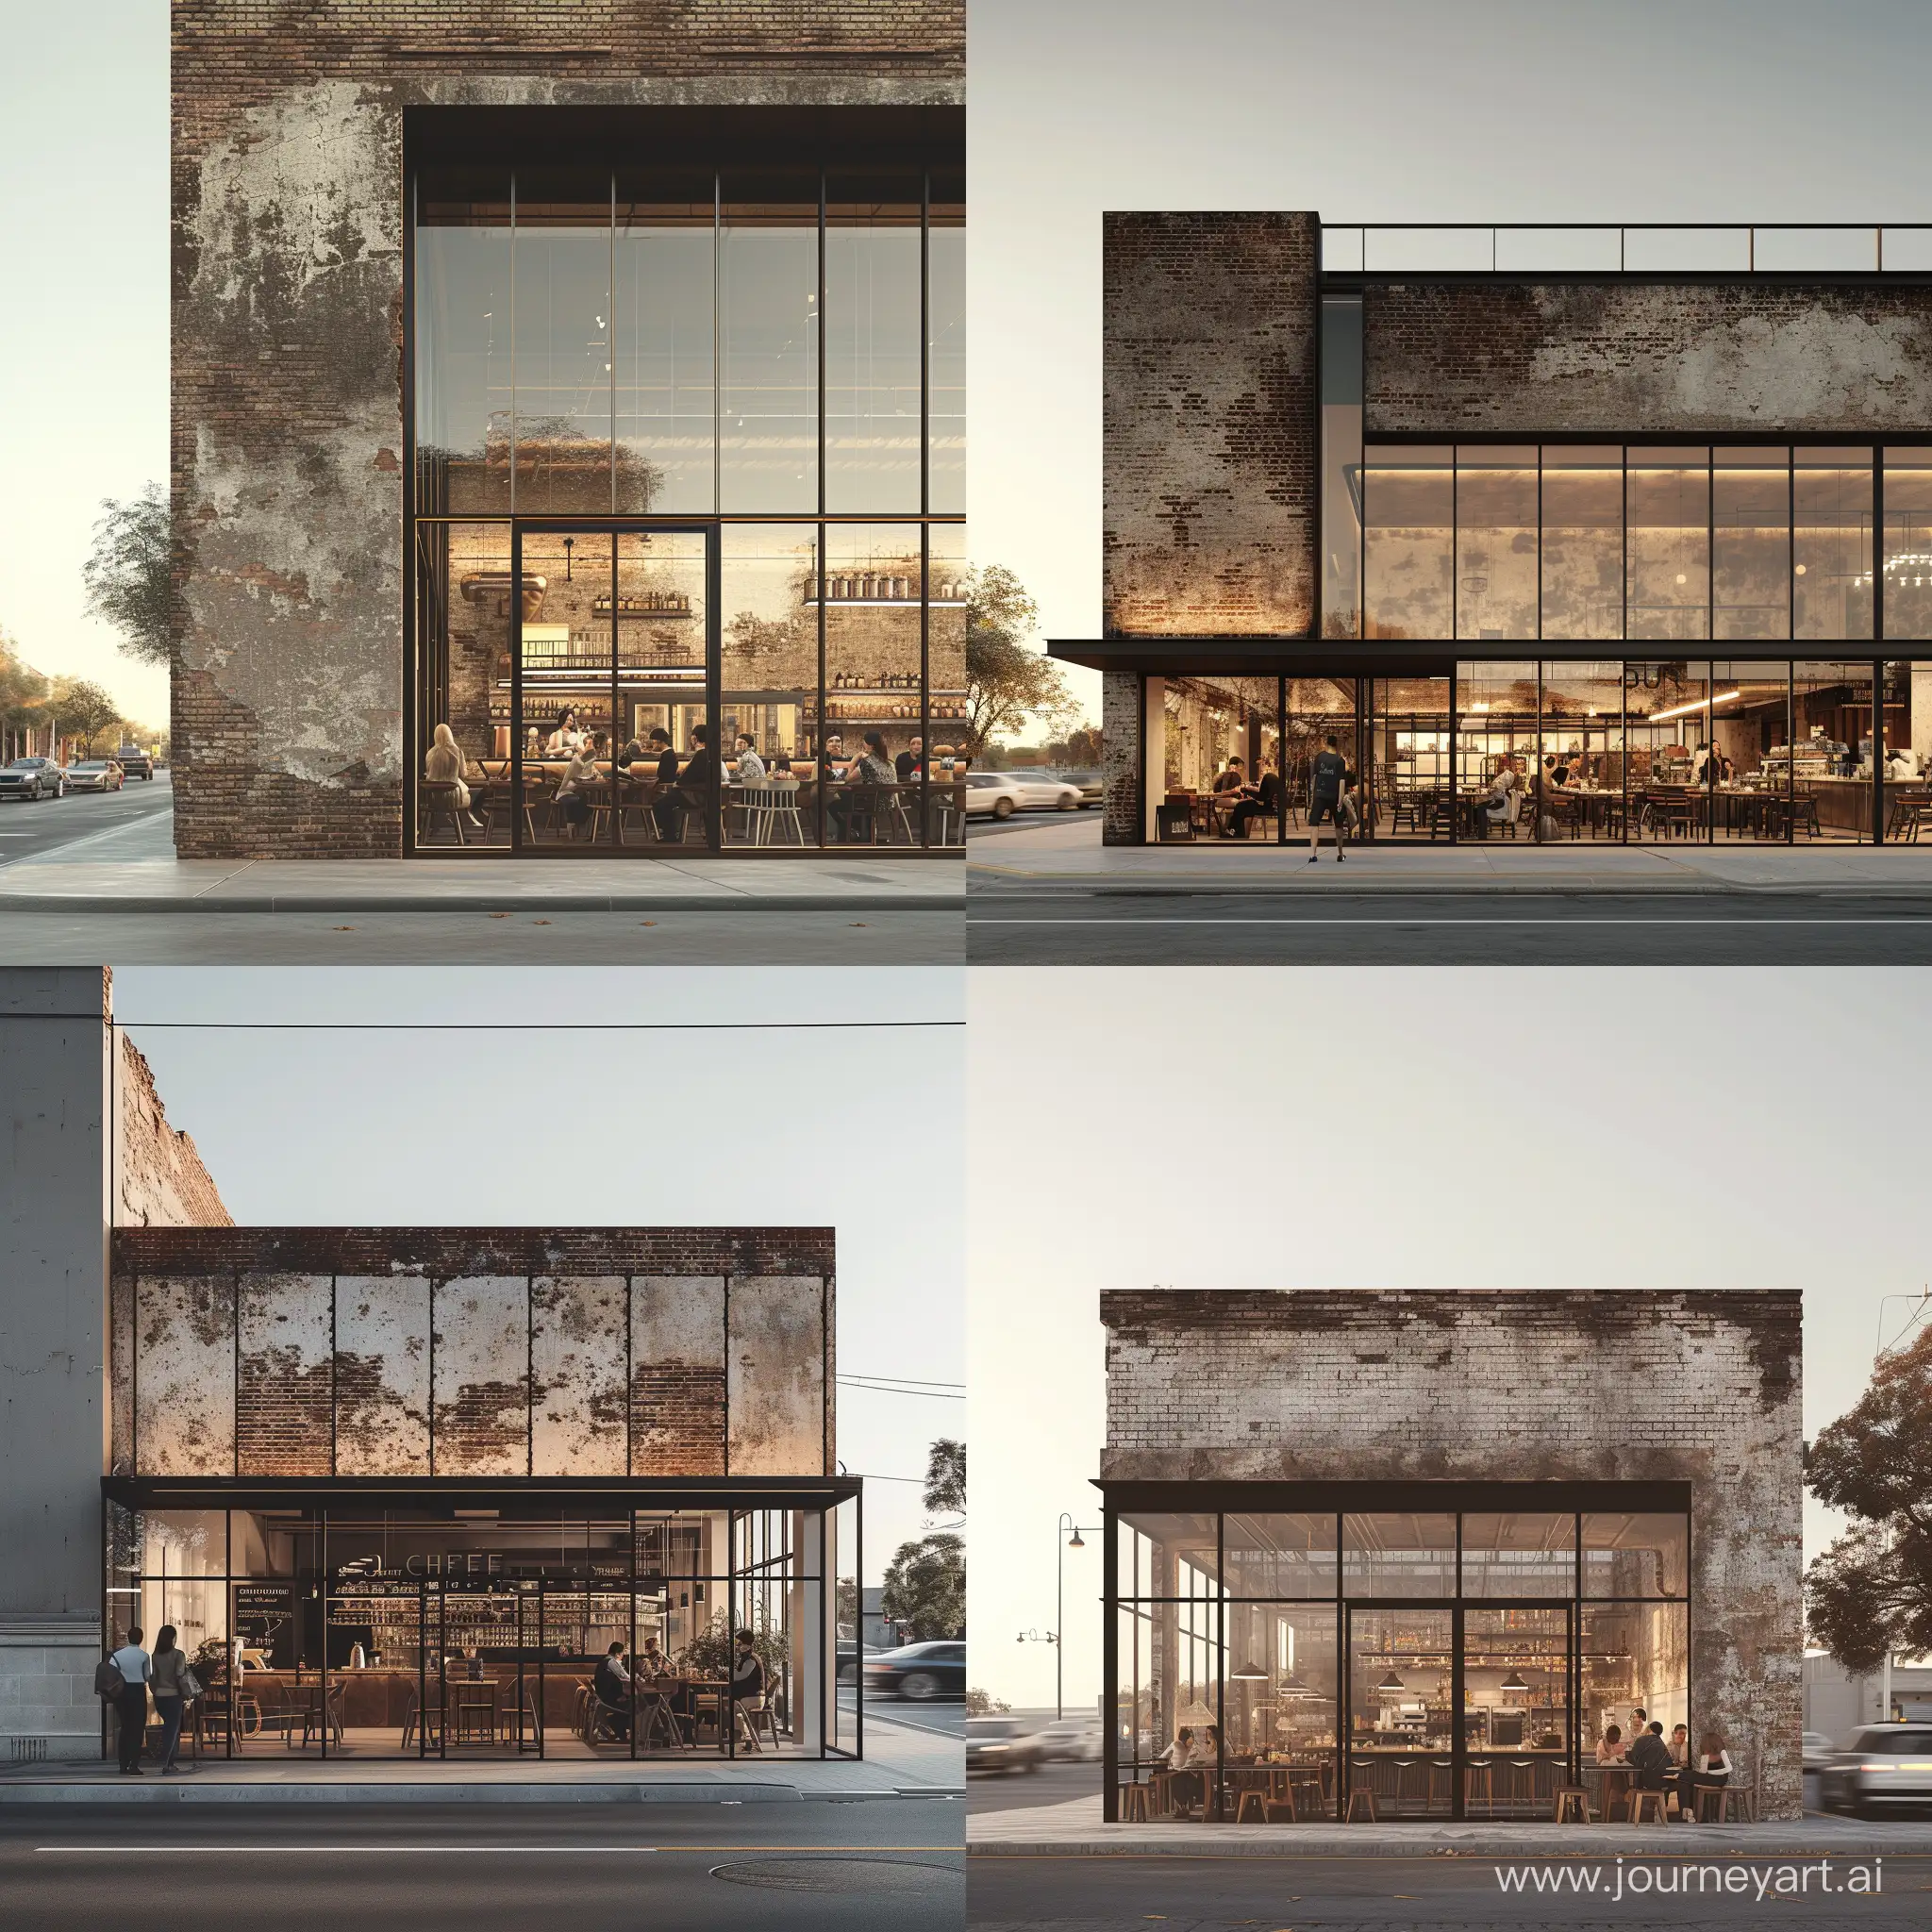 Design a modern and minimalist cafe facade, focusing on the juxtaposition of weathered bricks and expansive glass windows, which reflects a sophisticated blend of historical and contemporary architecture, aim for a shot that captures the essence of the space using a high-end DSLR camera, such as a Canon EOS R5 with a 50mm f/1.2 lens, ensuring the image is bathed in the soft, natural light of a clear afternoon sky, to accentuate the clean lines and minimalist design elements, the final image should be ultra-realistic 16K resolution with many details, showcasing a few patrons enjoying the ambiance, without any cars or pedestrians to maintain a clear view of the architectural beauty